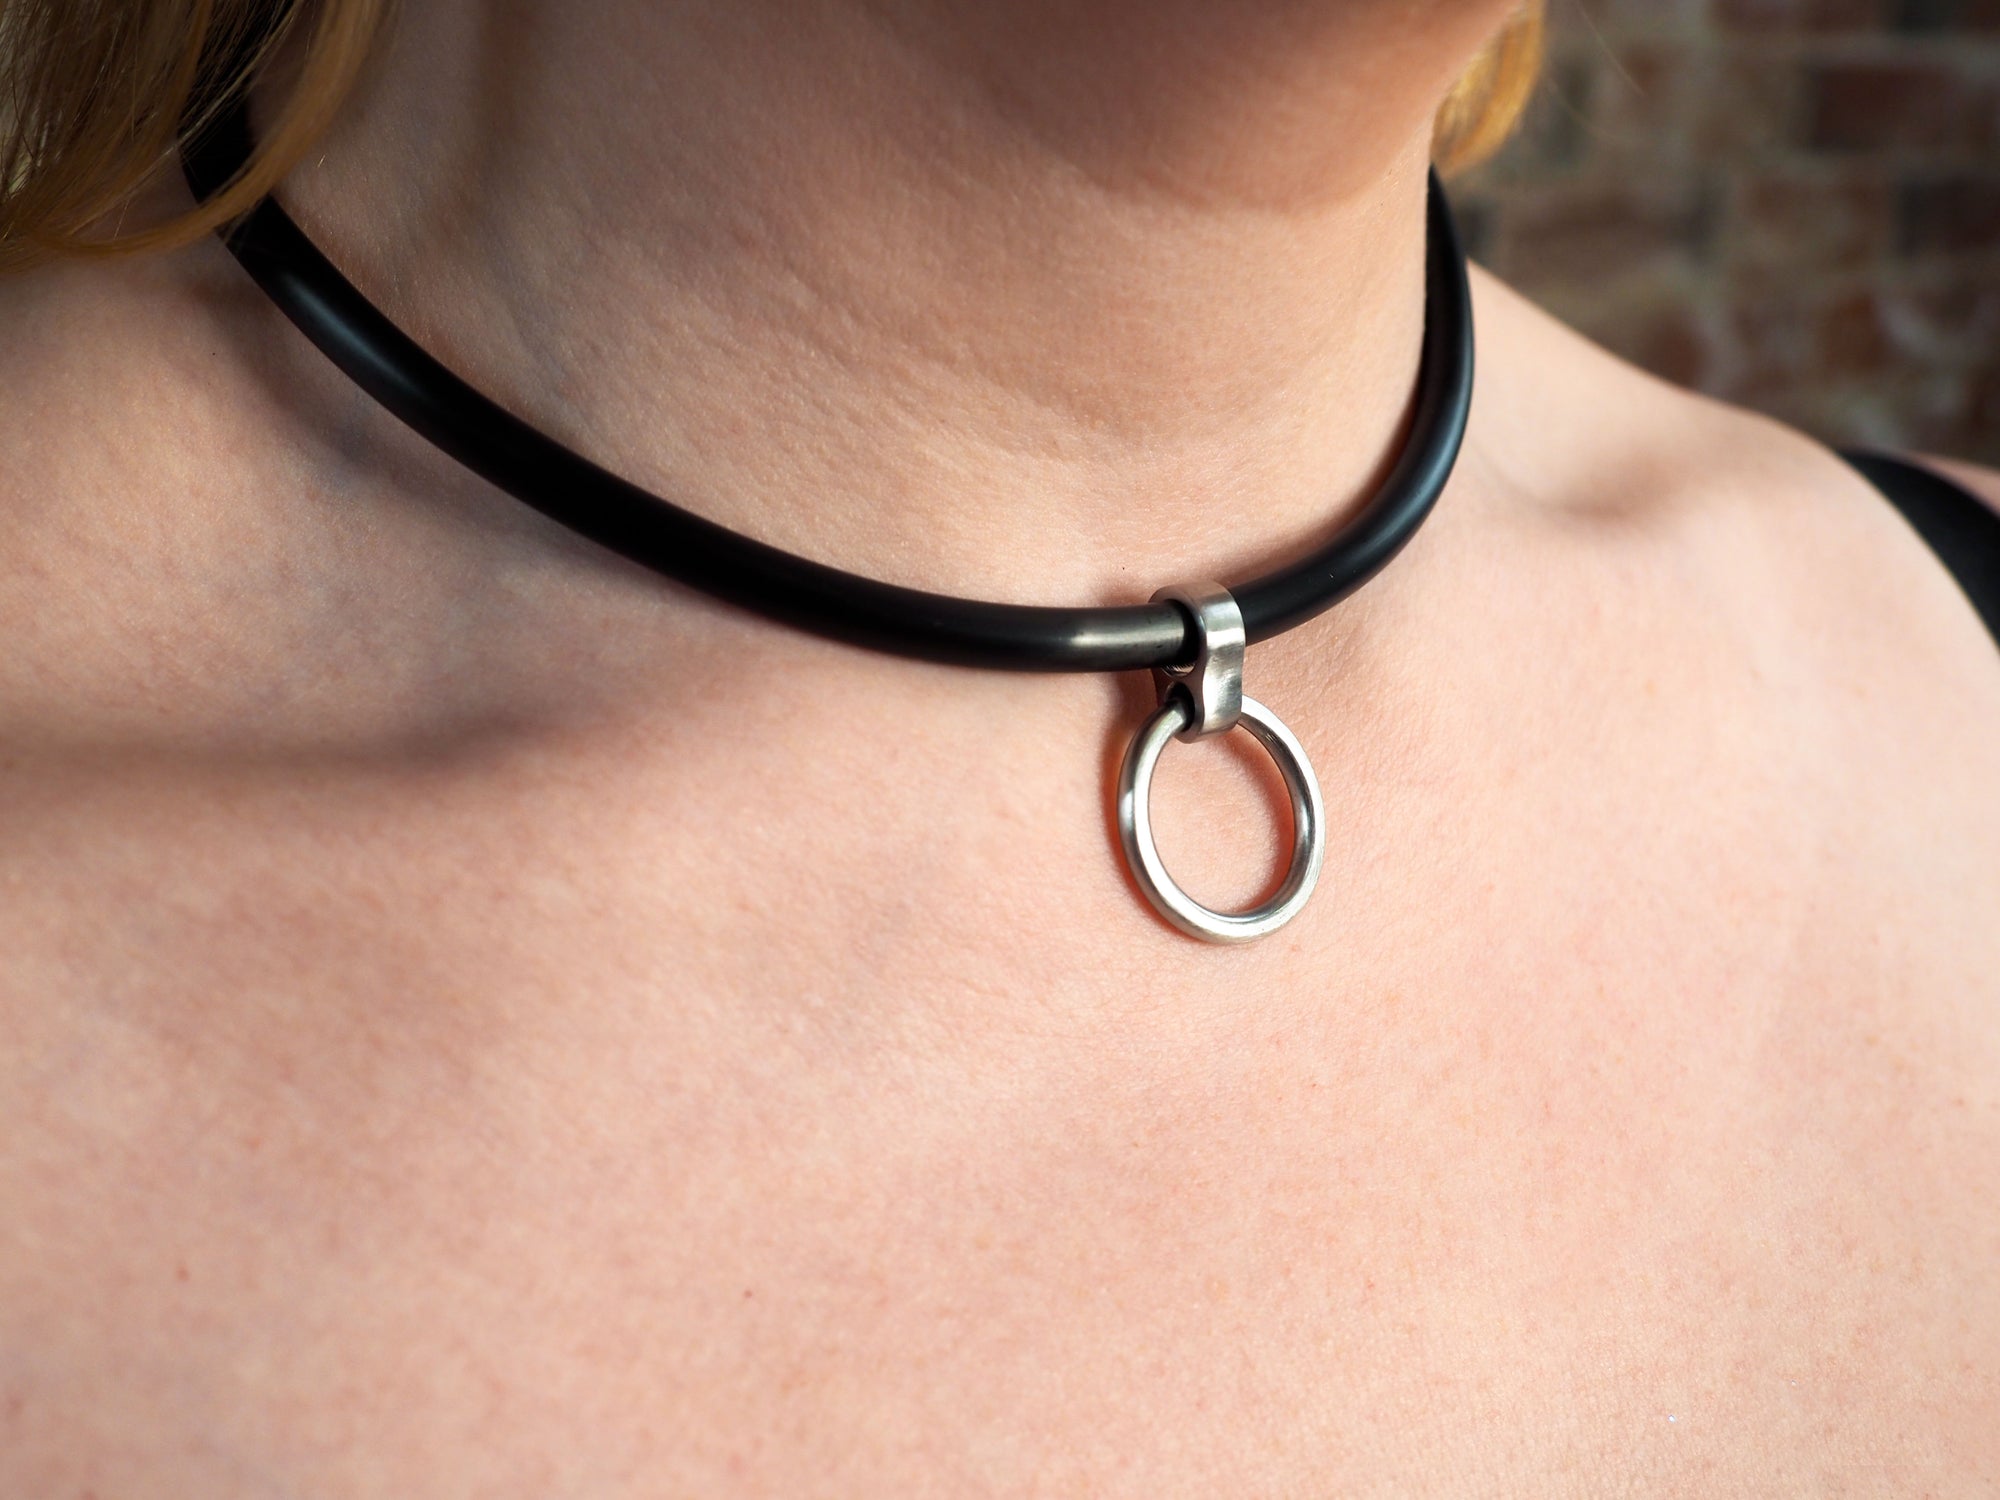 Curved 8mm Matte Black Stainless Steel Locking Eternity BDSM Slave Collar With Removable Ring- Available in Multiple Sizes